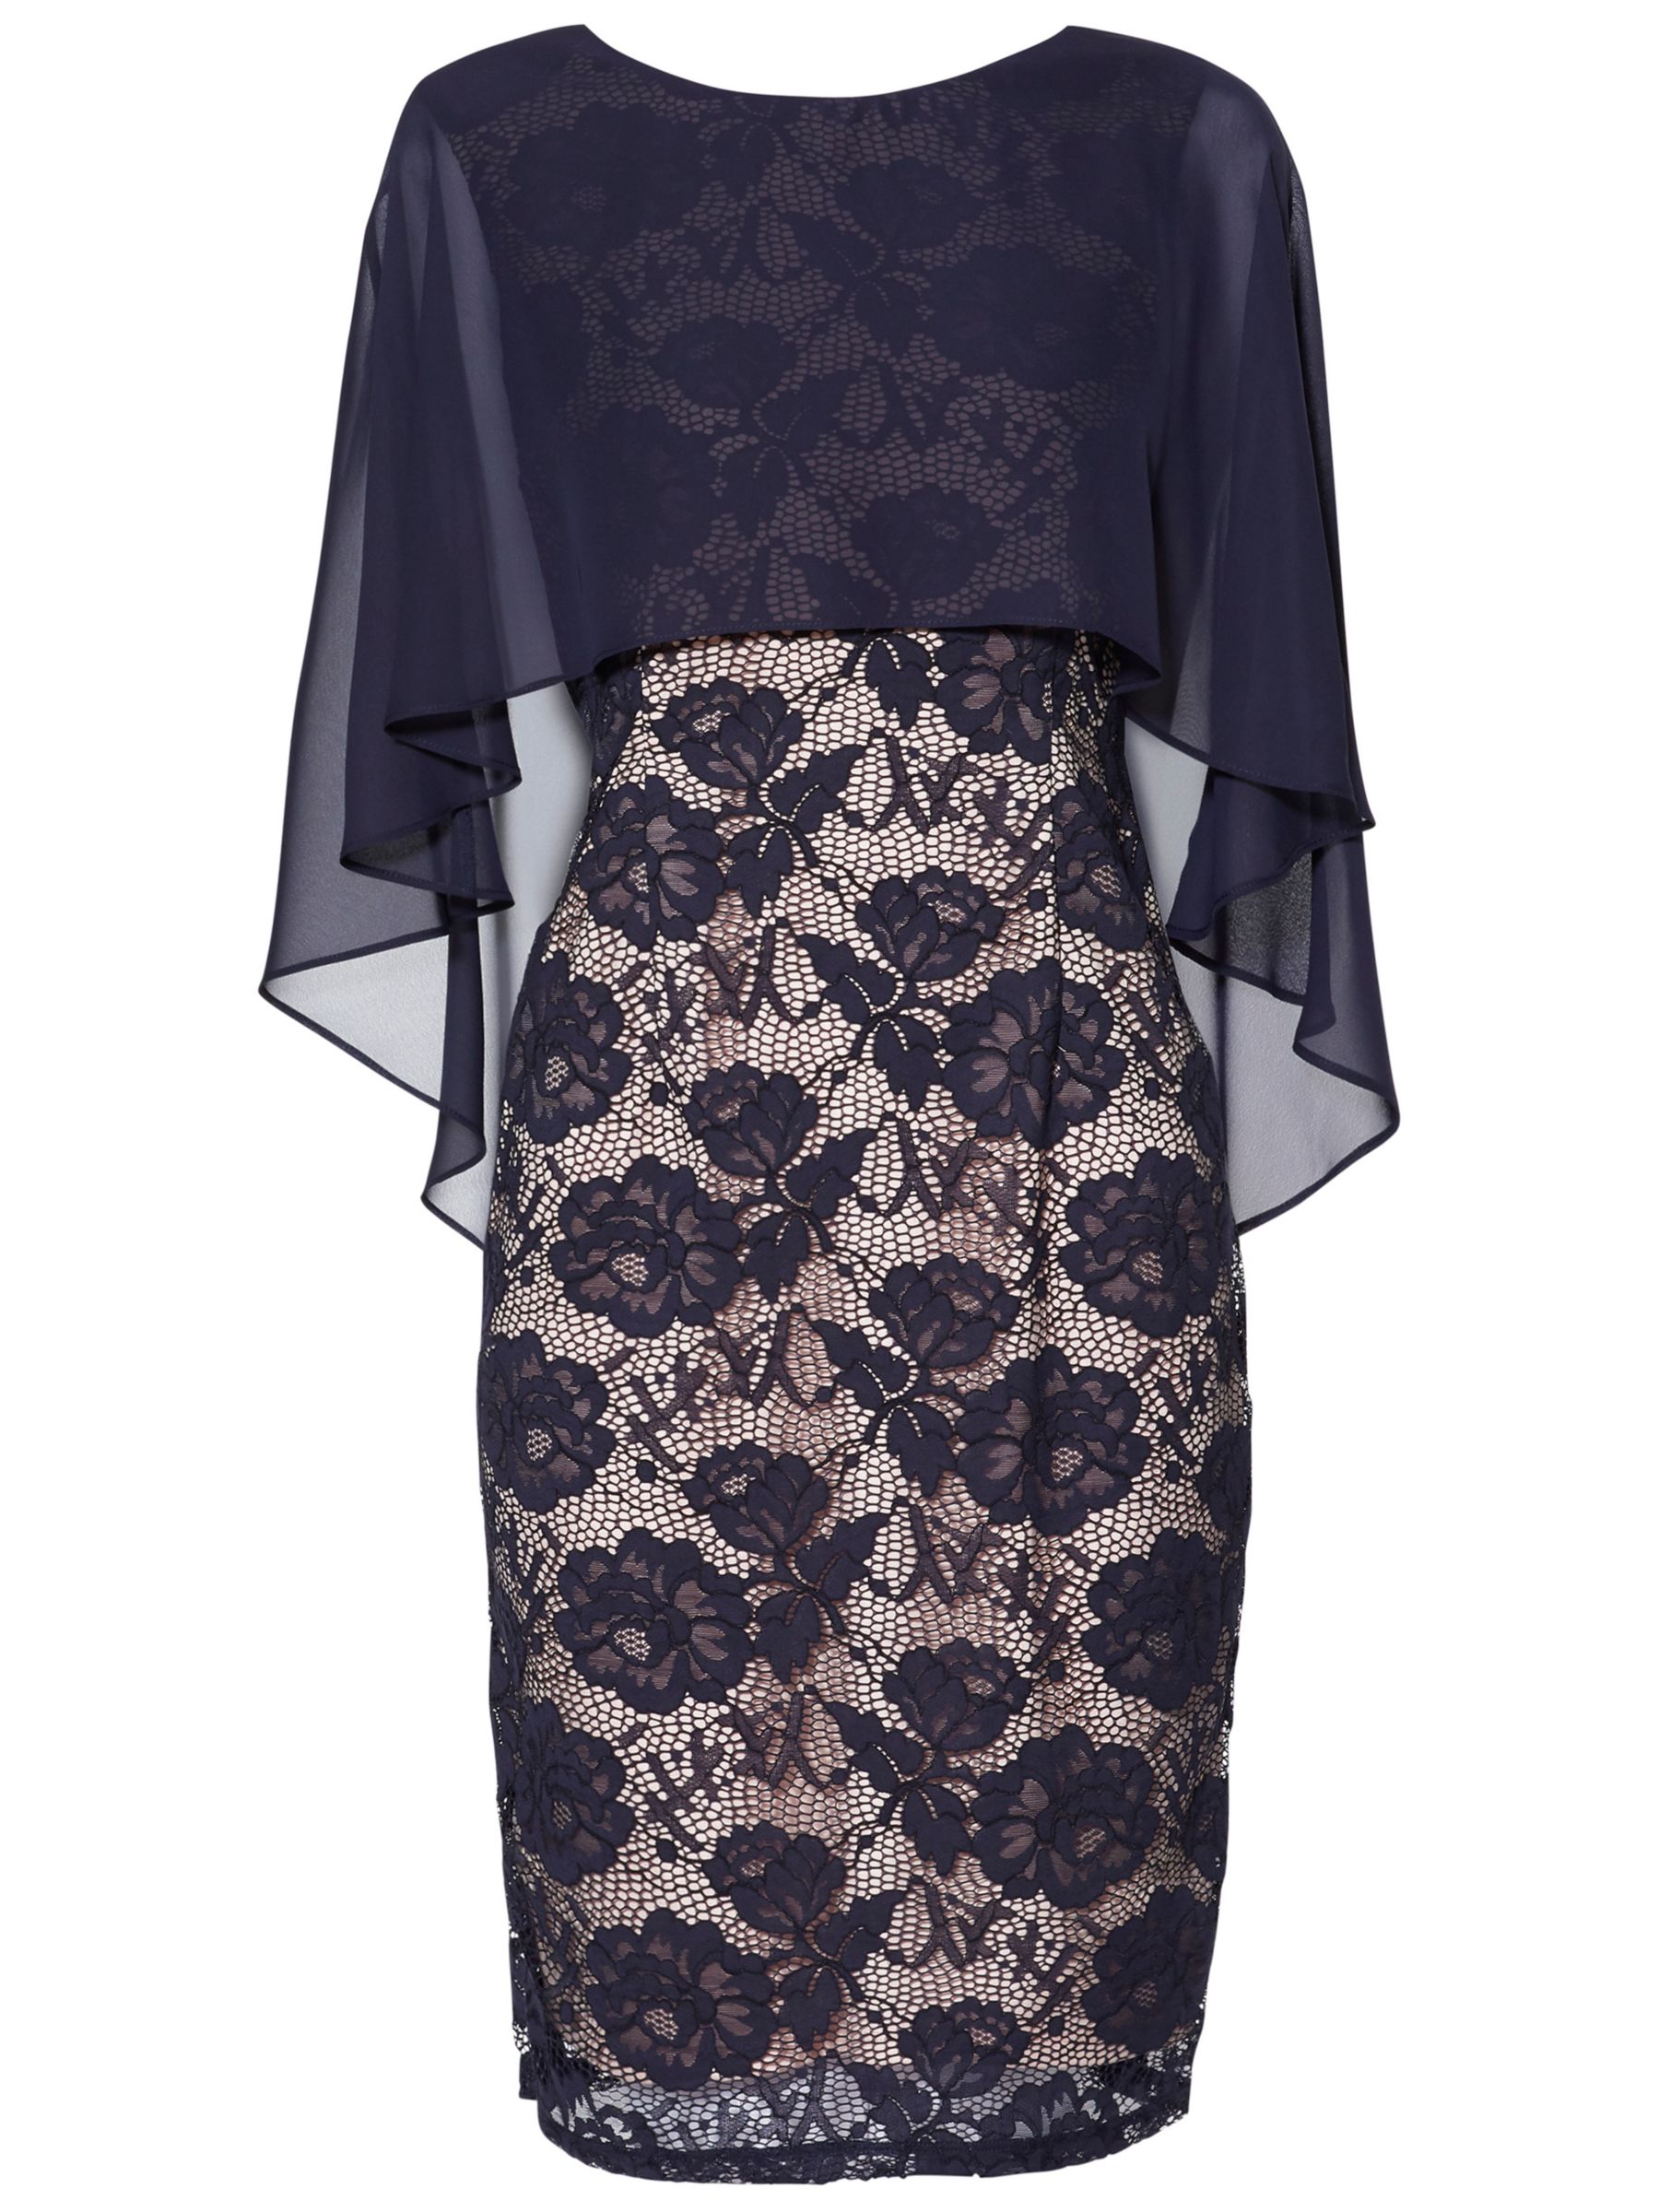 Gina Bacconi Minnie Floral Embroidery Dress, Navy at John Lewis & Partners